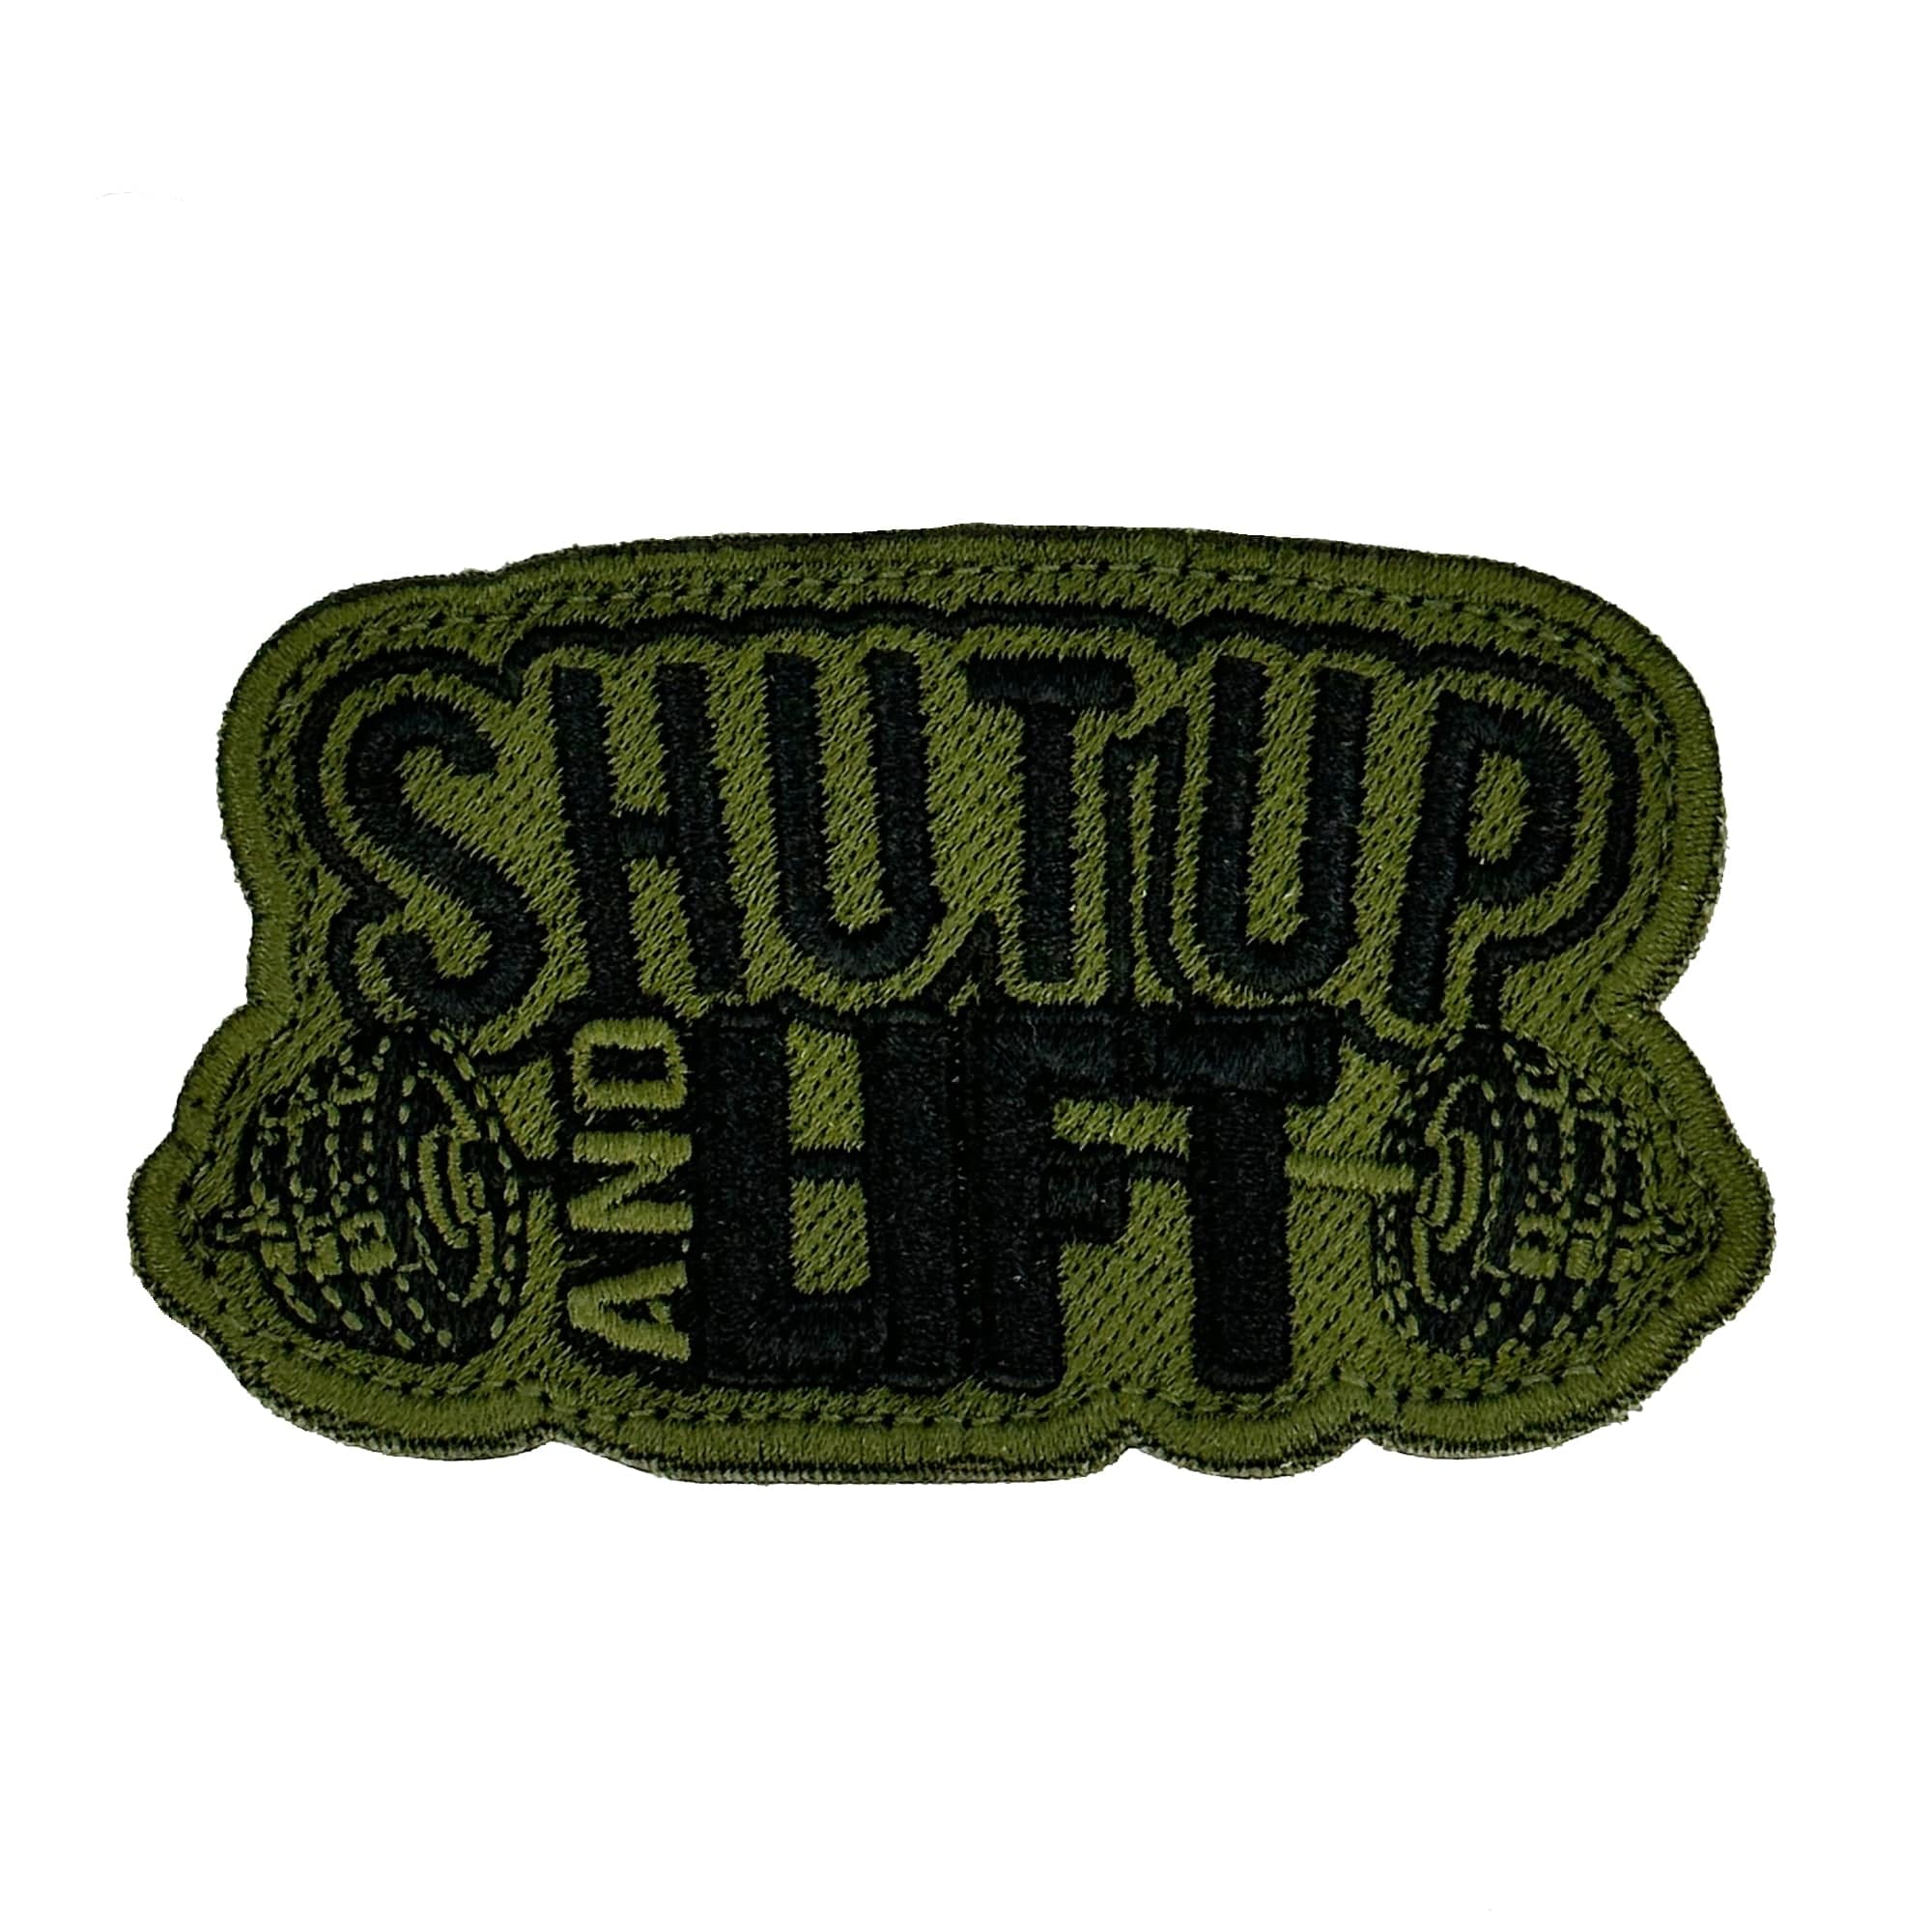 Tactical Gear Junkie Patches Olive Drab Shut Up and Lift - 3.25" Laser Cut Patch